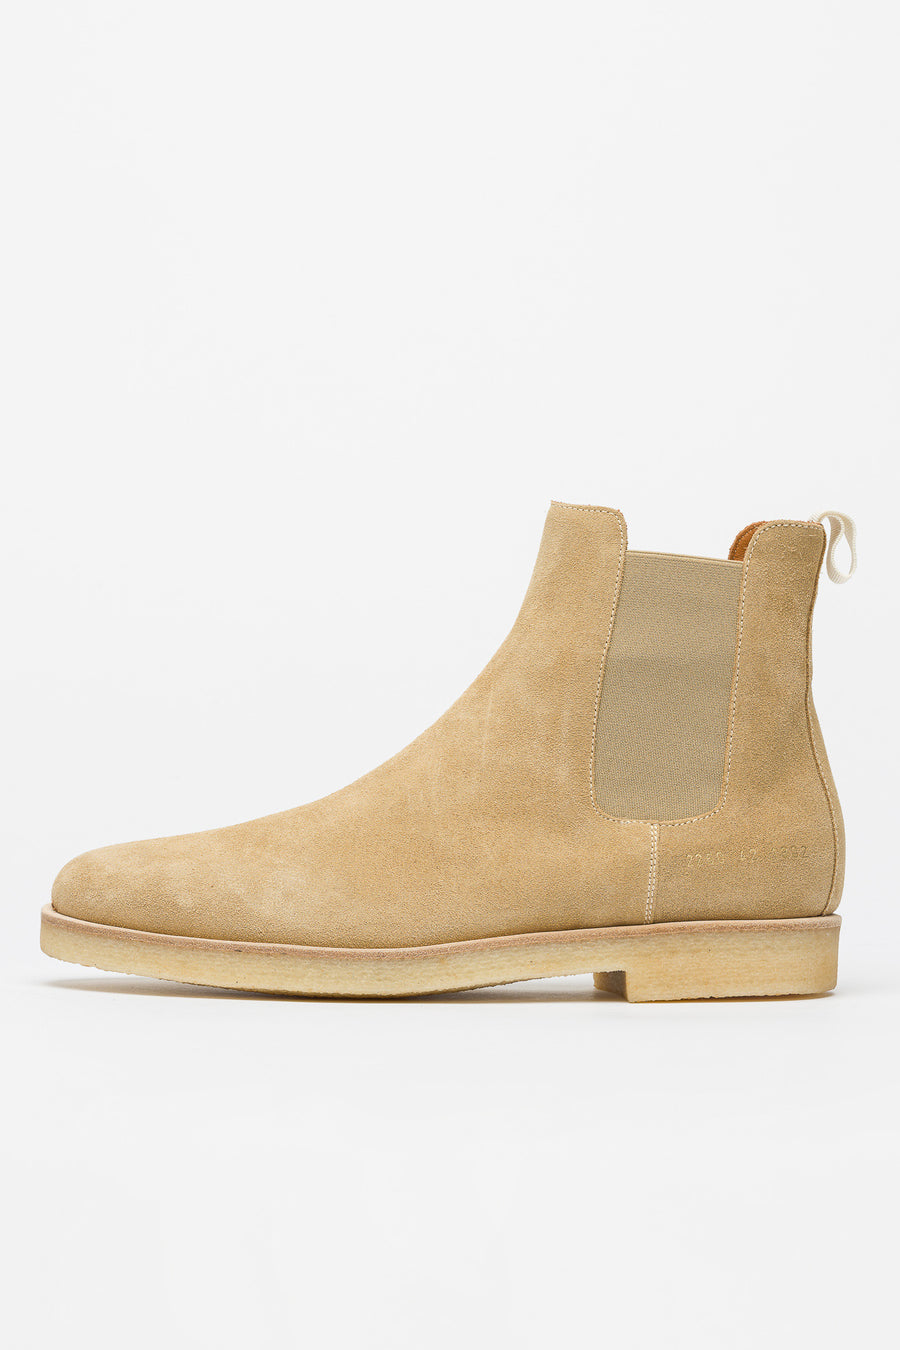 common projects chelsea tan